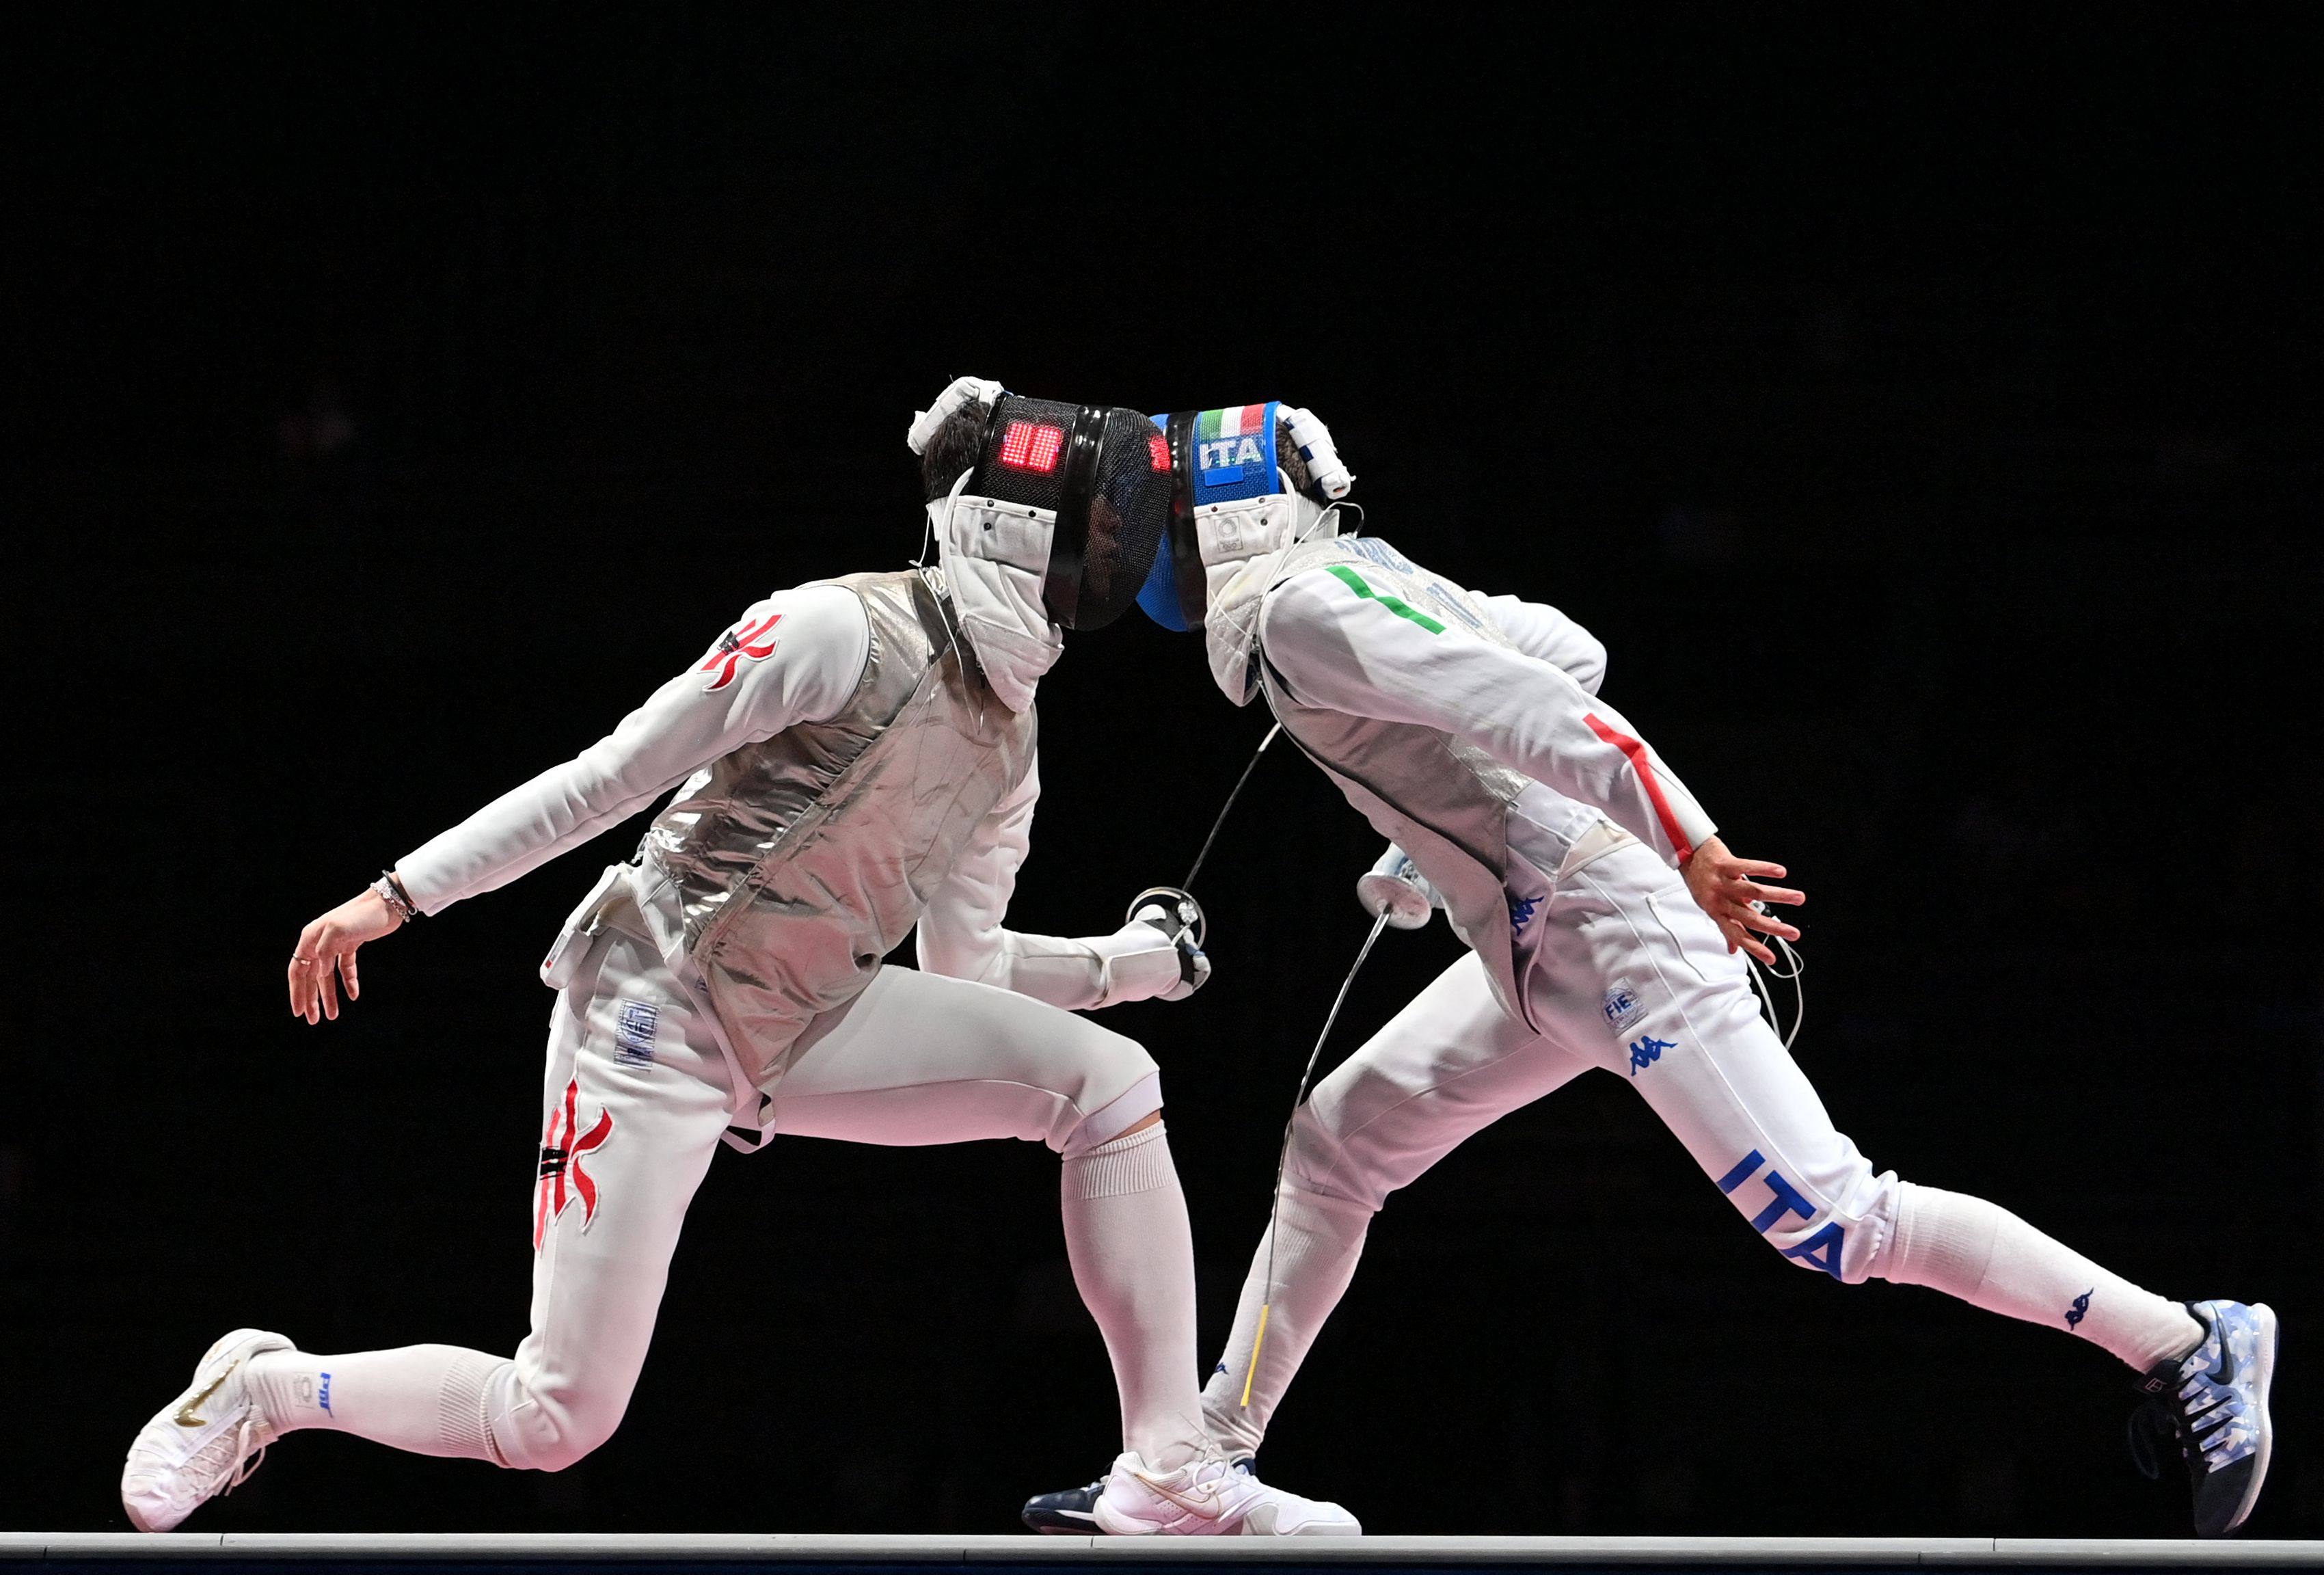 Hong Kong’s Cheung Ka-long (left) competes against Italy’s Daniele Garozzo in the men’s individual foil gold medal bout at the Tokyo 2020 Olympic Games. Photo: AFP